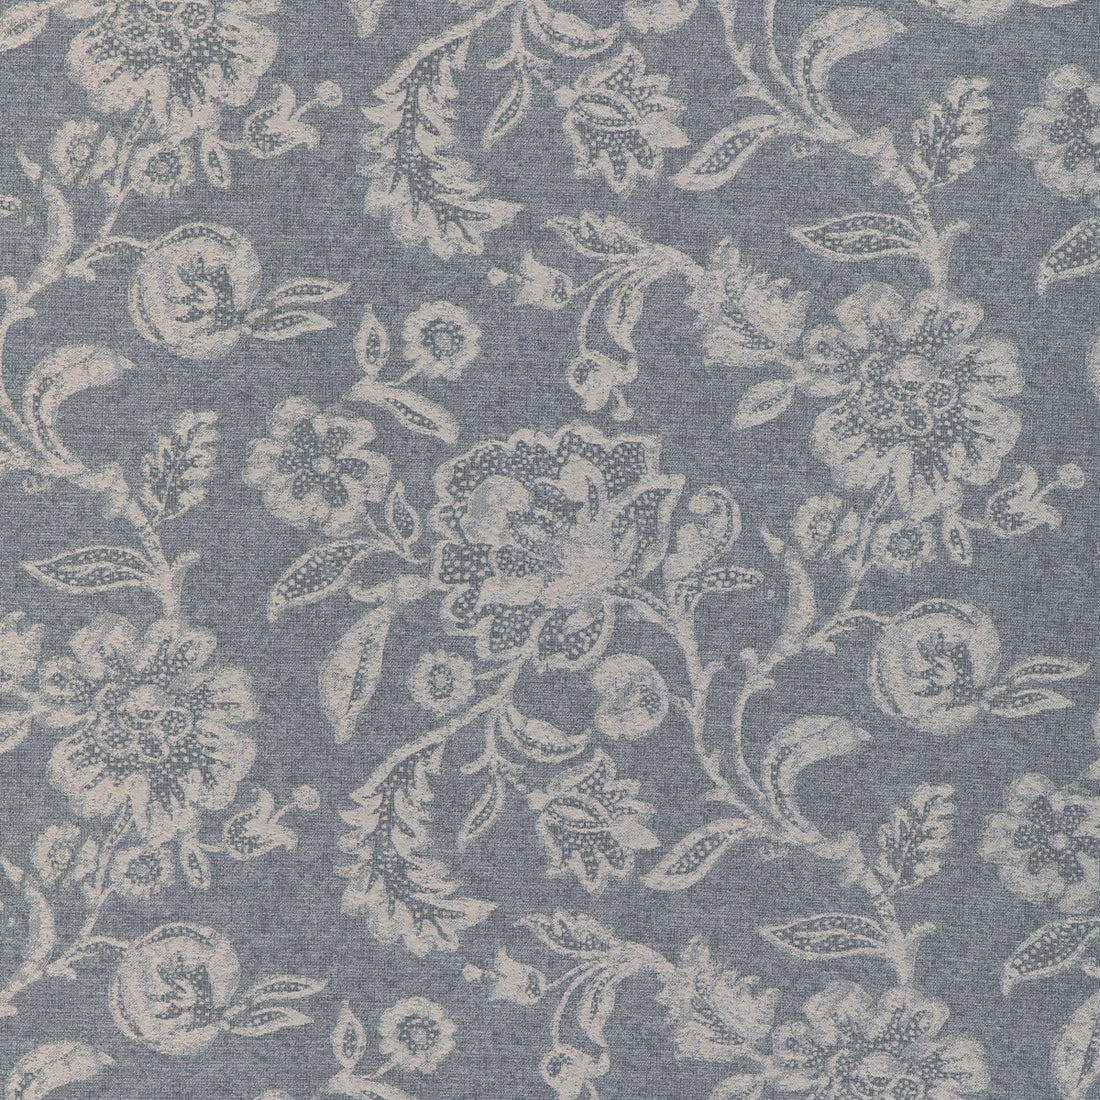 Chesapeake fabric in riverstone color - pattern 37083.52.0 - by Kravet Contract in the Chesapeake collection